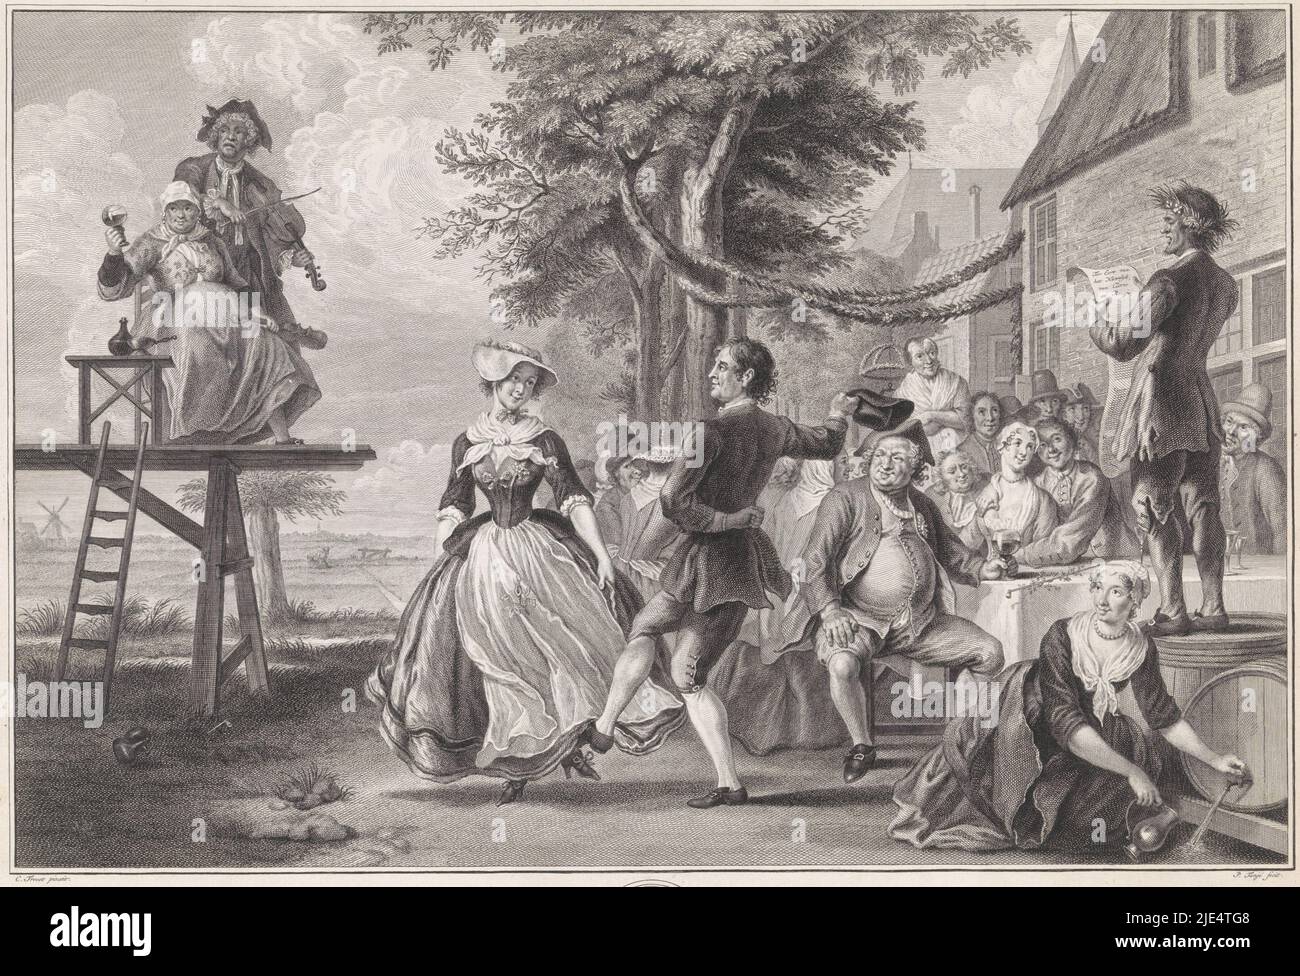 Cloris and Roosje dance at their wedding. On the platform two violinists, whose glass is raised by the woman. On the right are the partygoers and a man, giving a speech from a barrel. At the bottom in the margin the coat of arms of and a commission to Jan Jacob de Bruyn, who had the original painting in his collection. Scene from the lyrical play The wedding of Cloris and Roosje, Wedding of Cloris and Roosje The wedding of Cloris and Roosje / Les noces de Clorus et Rosette, print maker: Pieter Tanjé, (mentioned on object), after: Cornelis Troost, (mentioned on object), publisher: Pierre Stock Photo